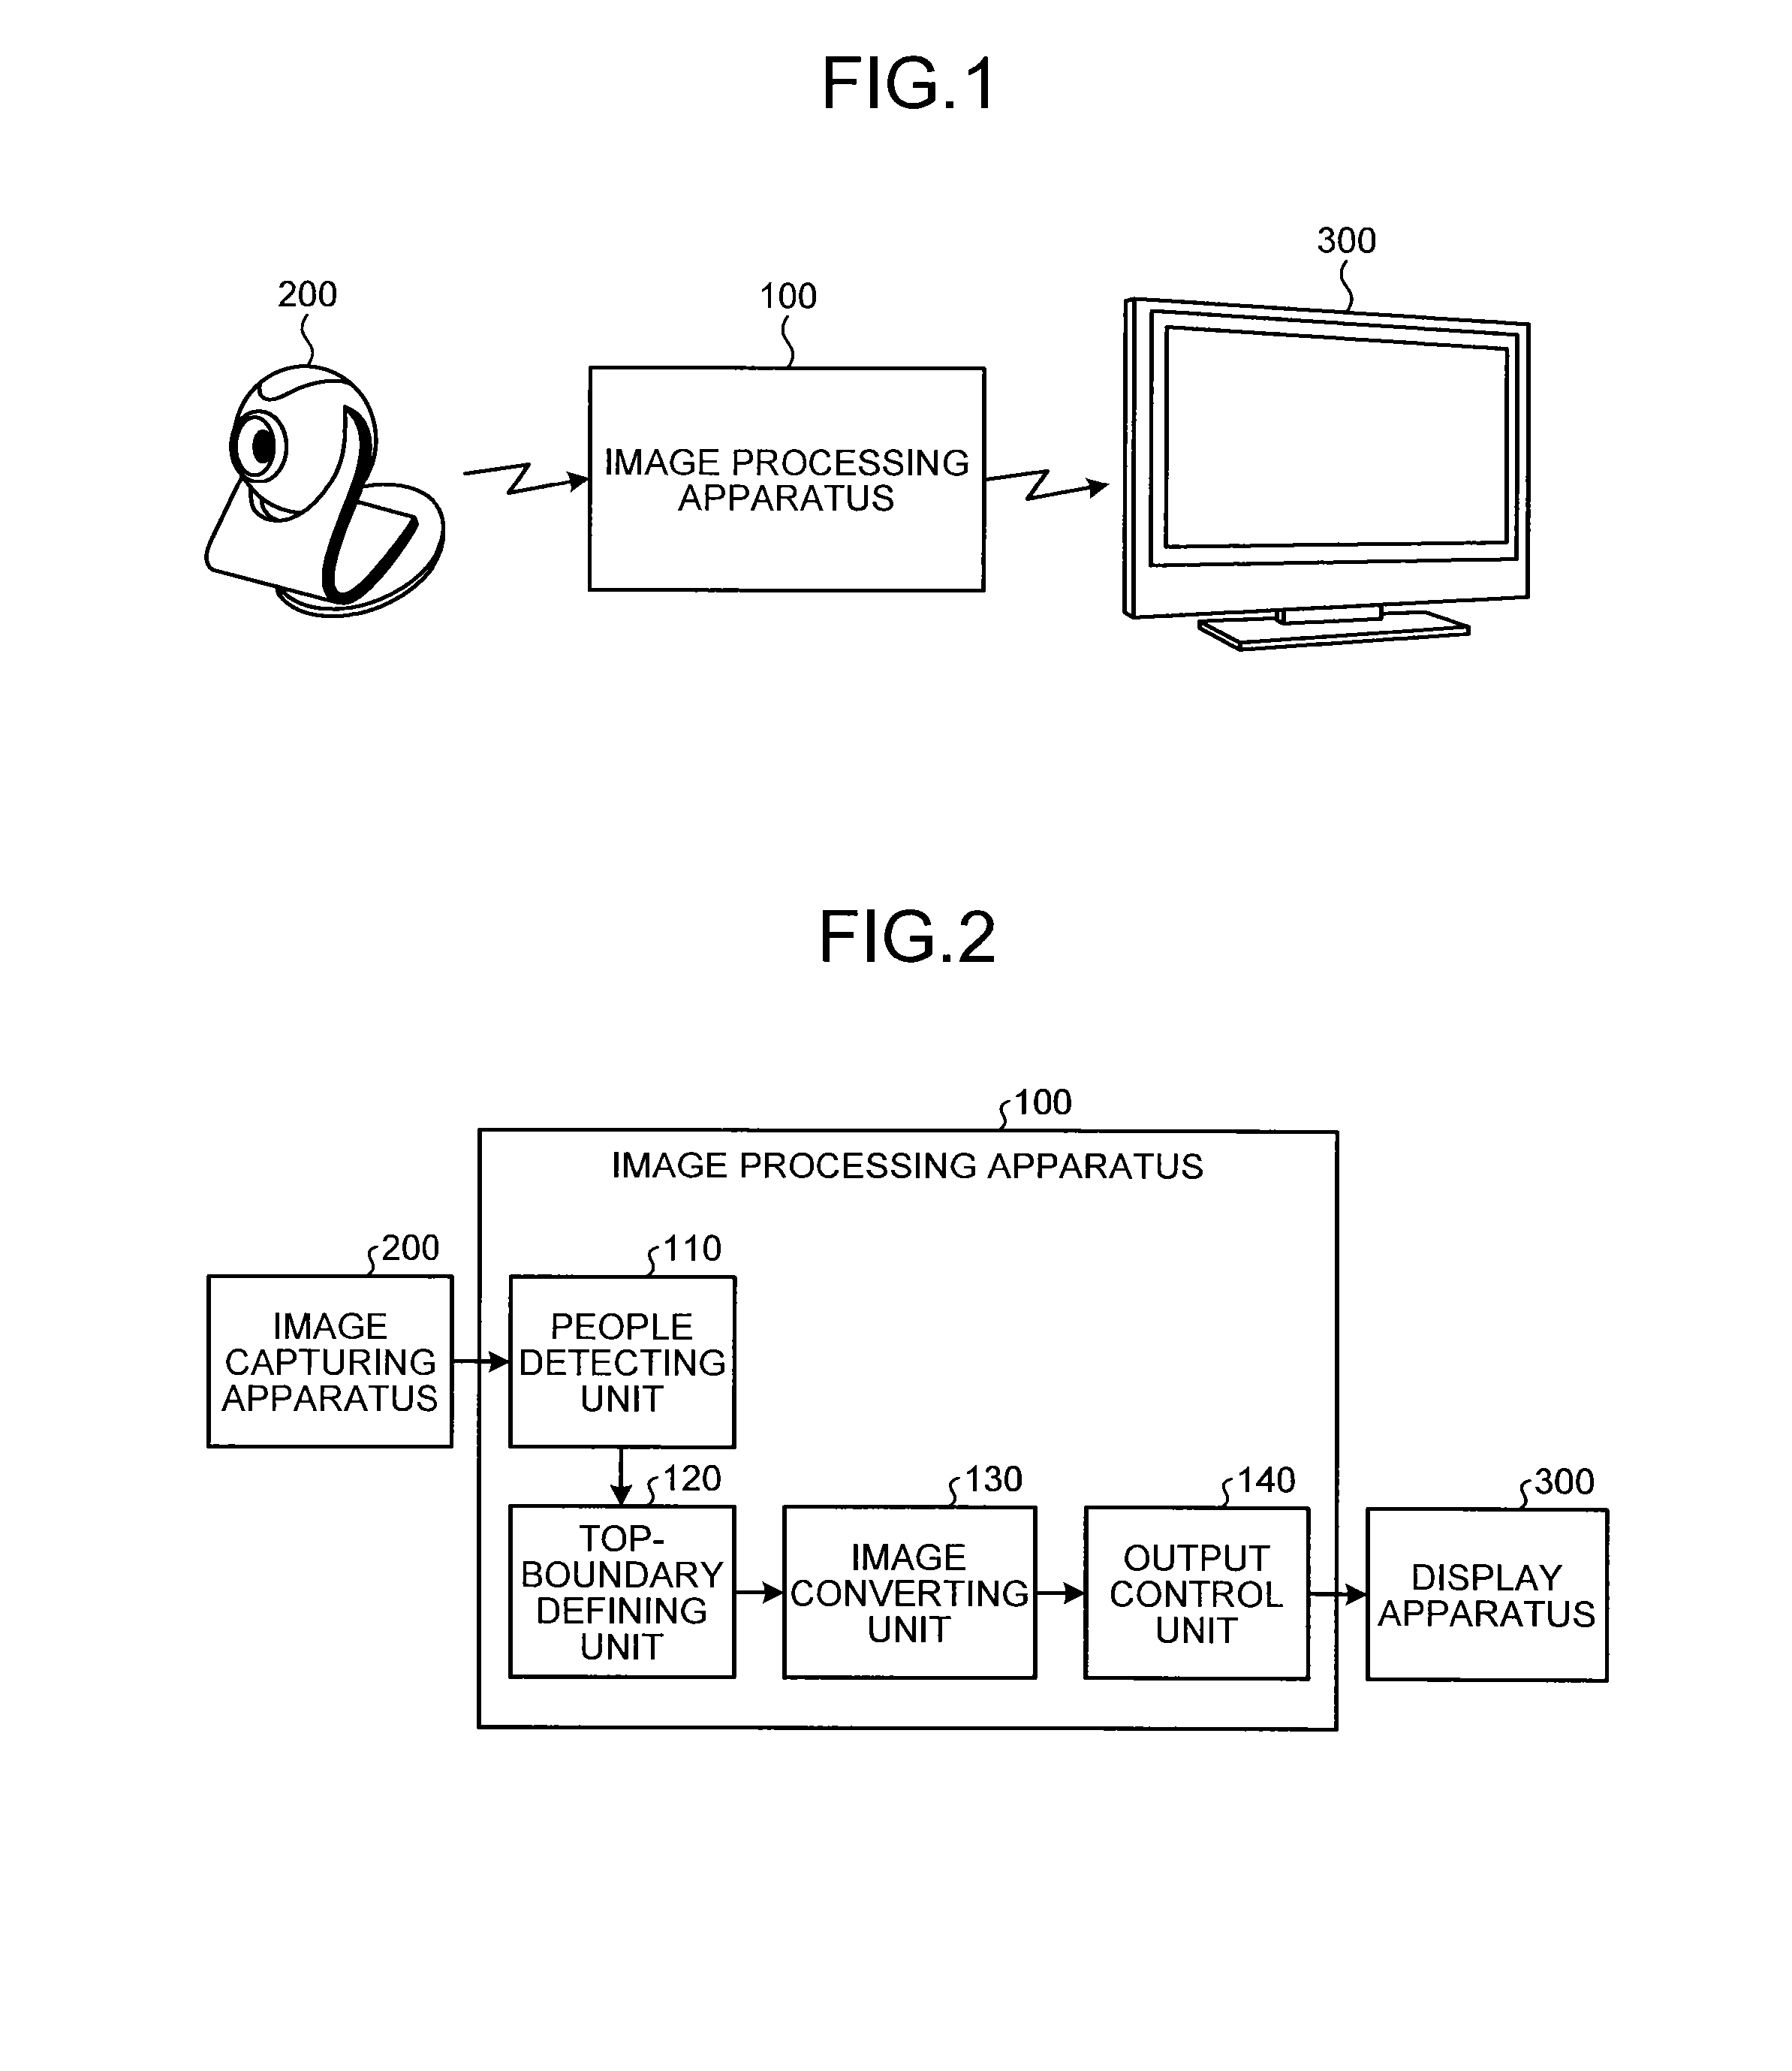 Image processing apparatus, image processing system, and non-transitory computer-readable medium